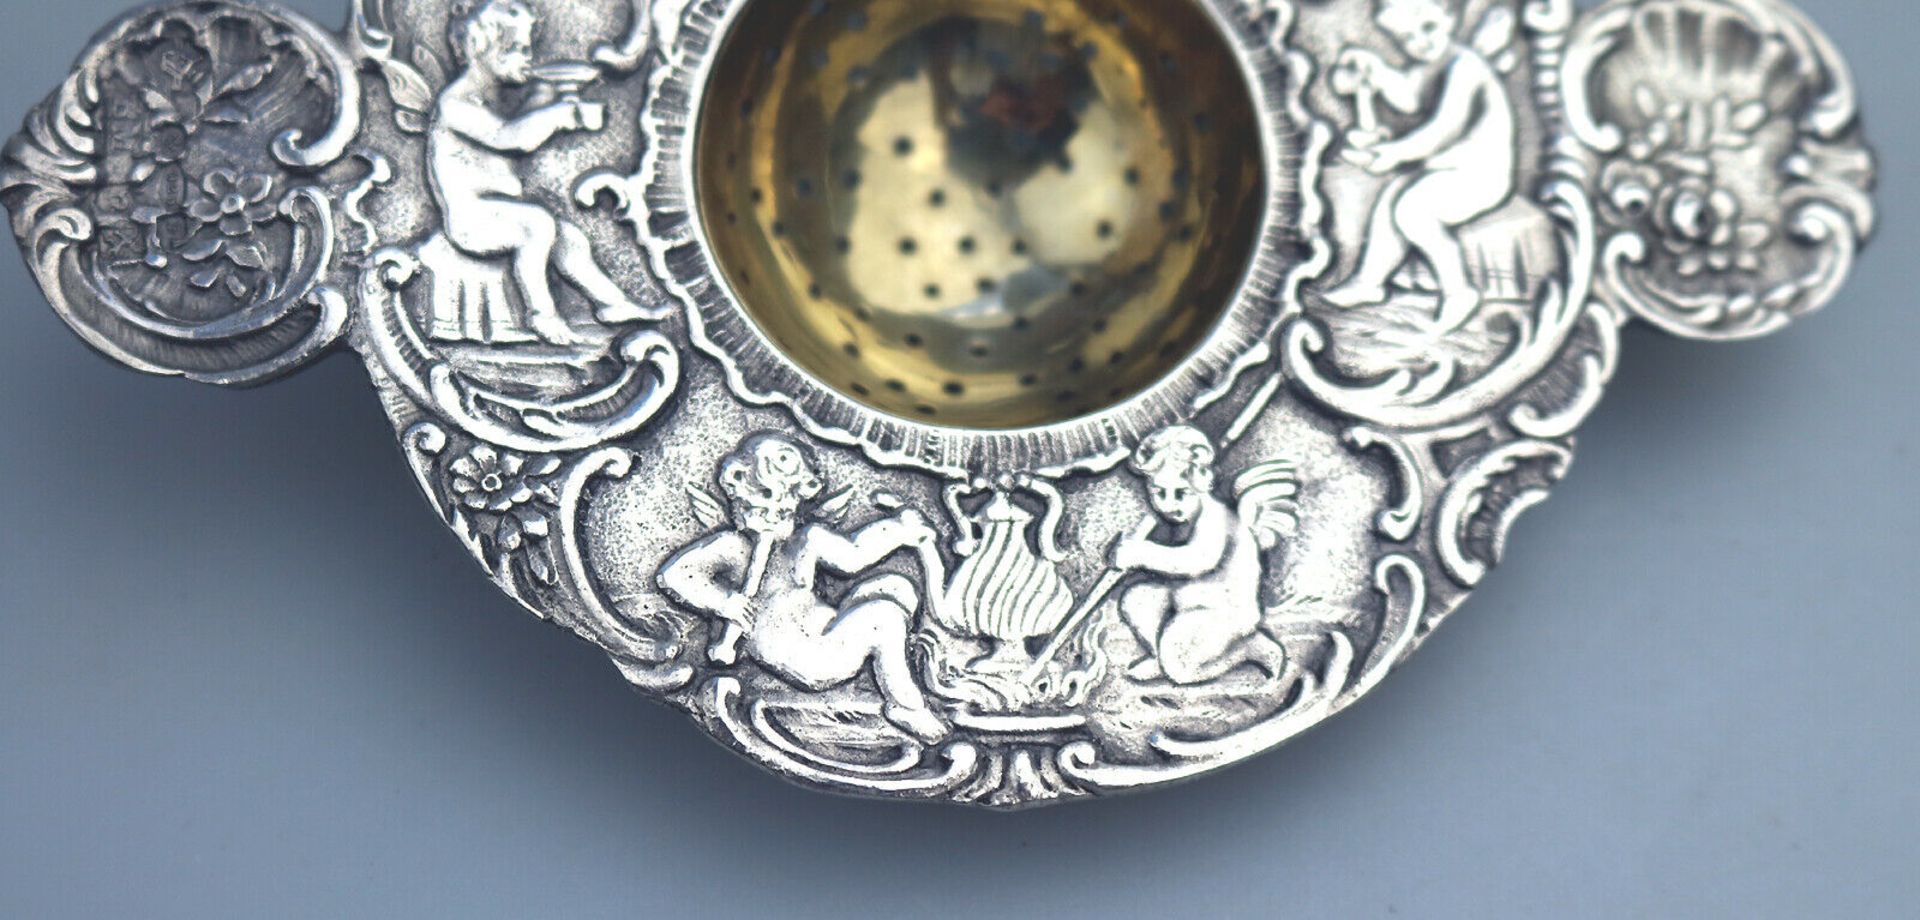 A Fine Hanau 925 Solid Silver Tea Strainer by Berthold Mueller decorated with fairies C.1906 - Image 2 of 5